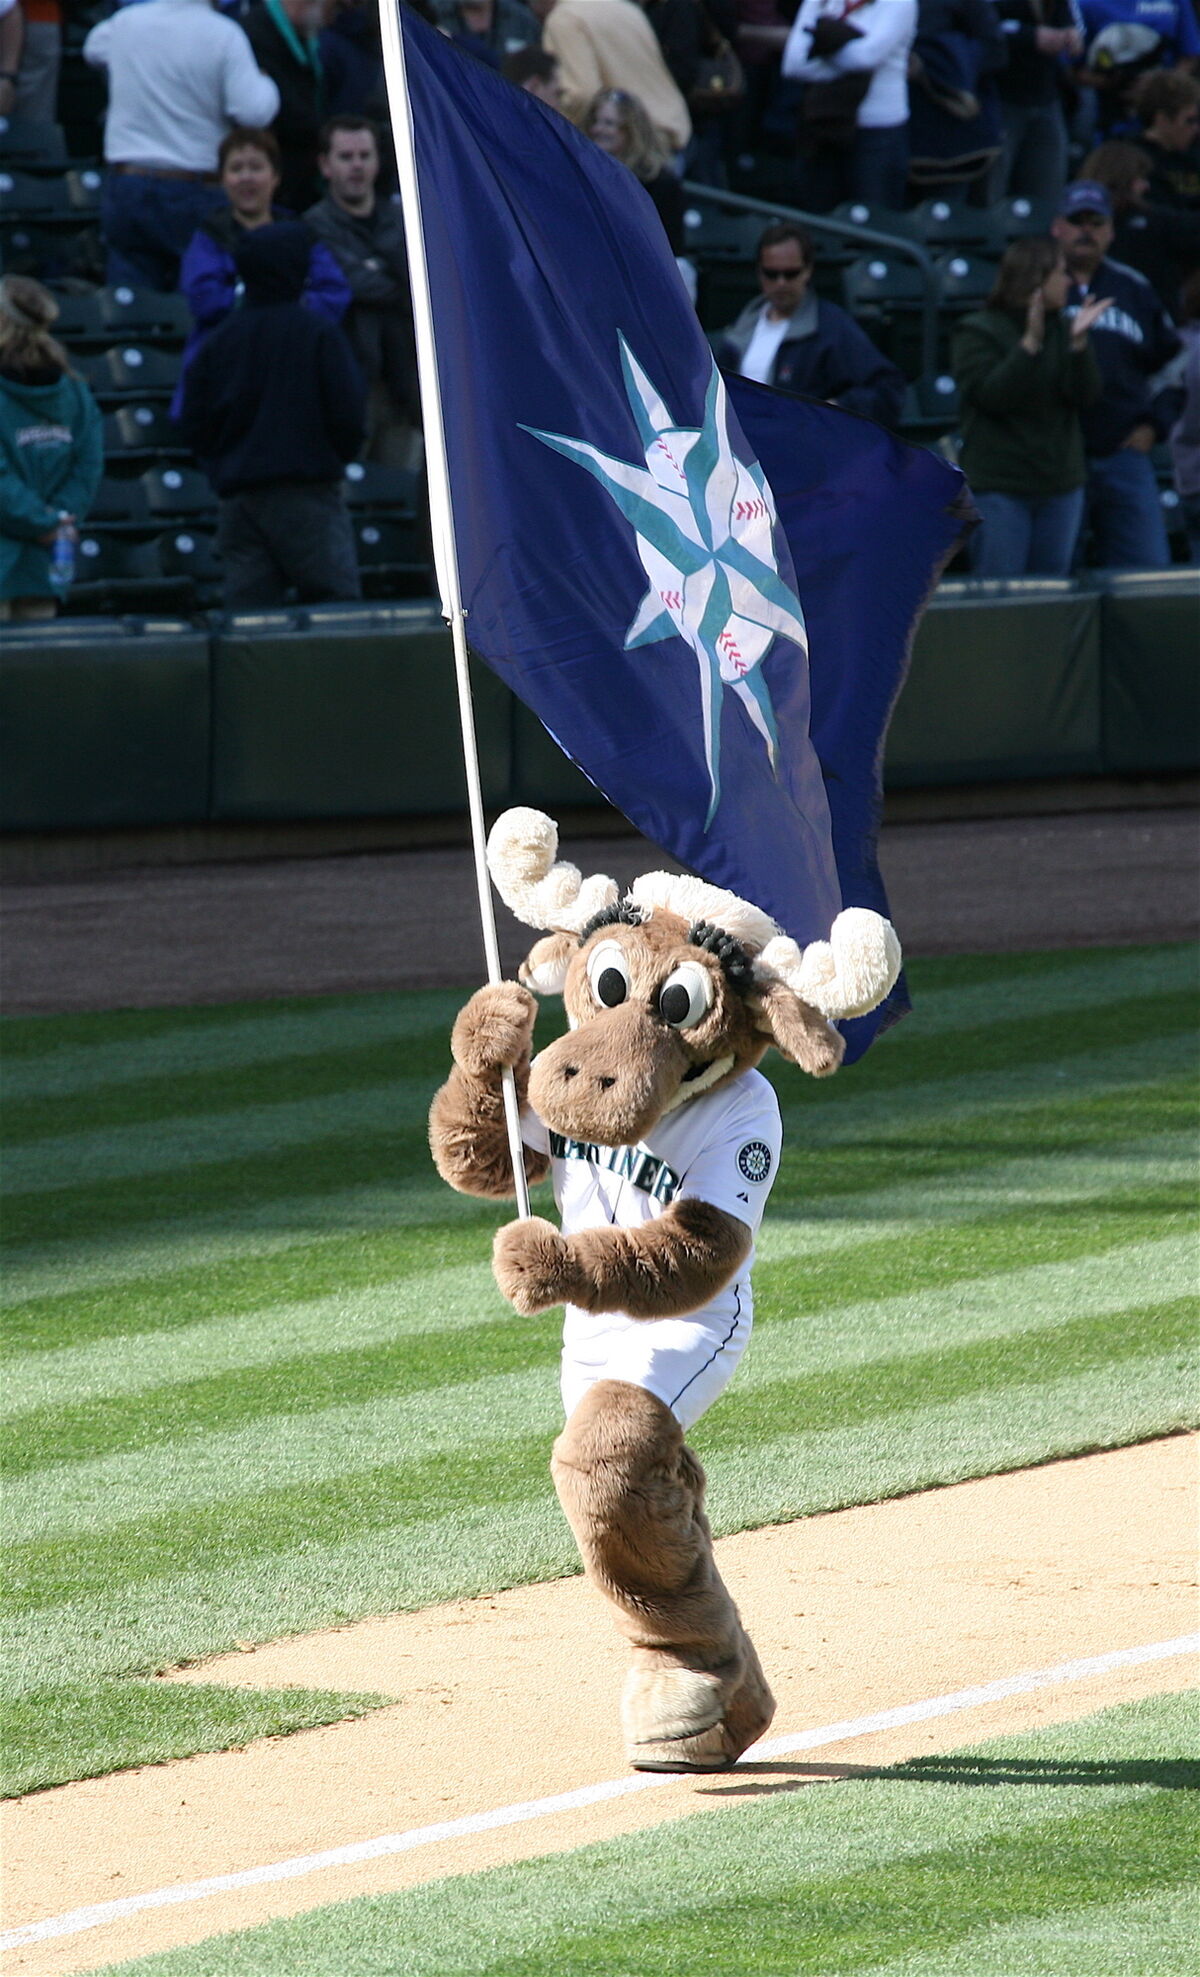 Seattle Mariners pitcher and Moose mascot stand up against